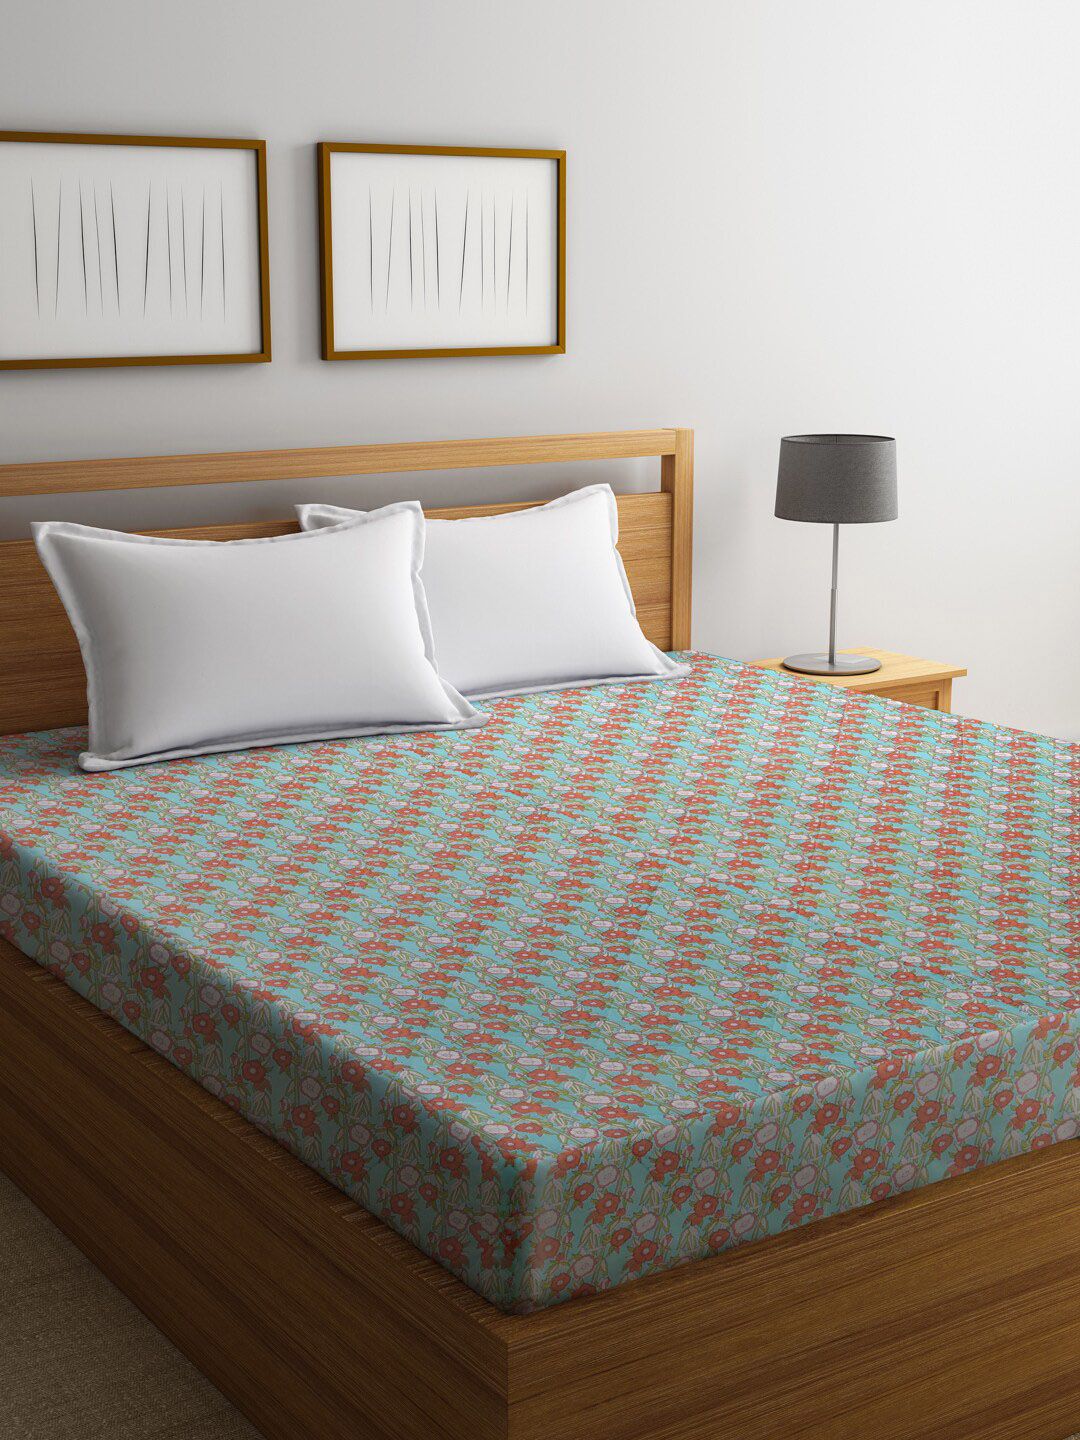 Rajasthan Decor Blue & Red Screen Printed Double King Cotton Mattress Protector Price in India